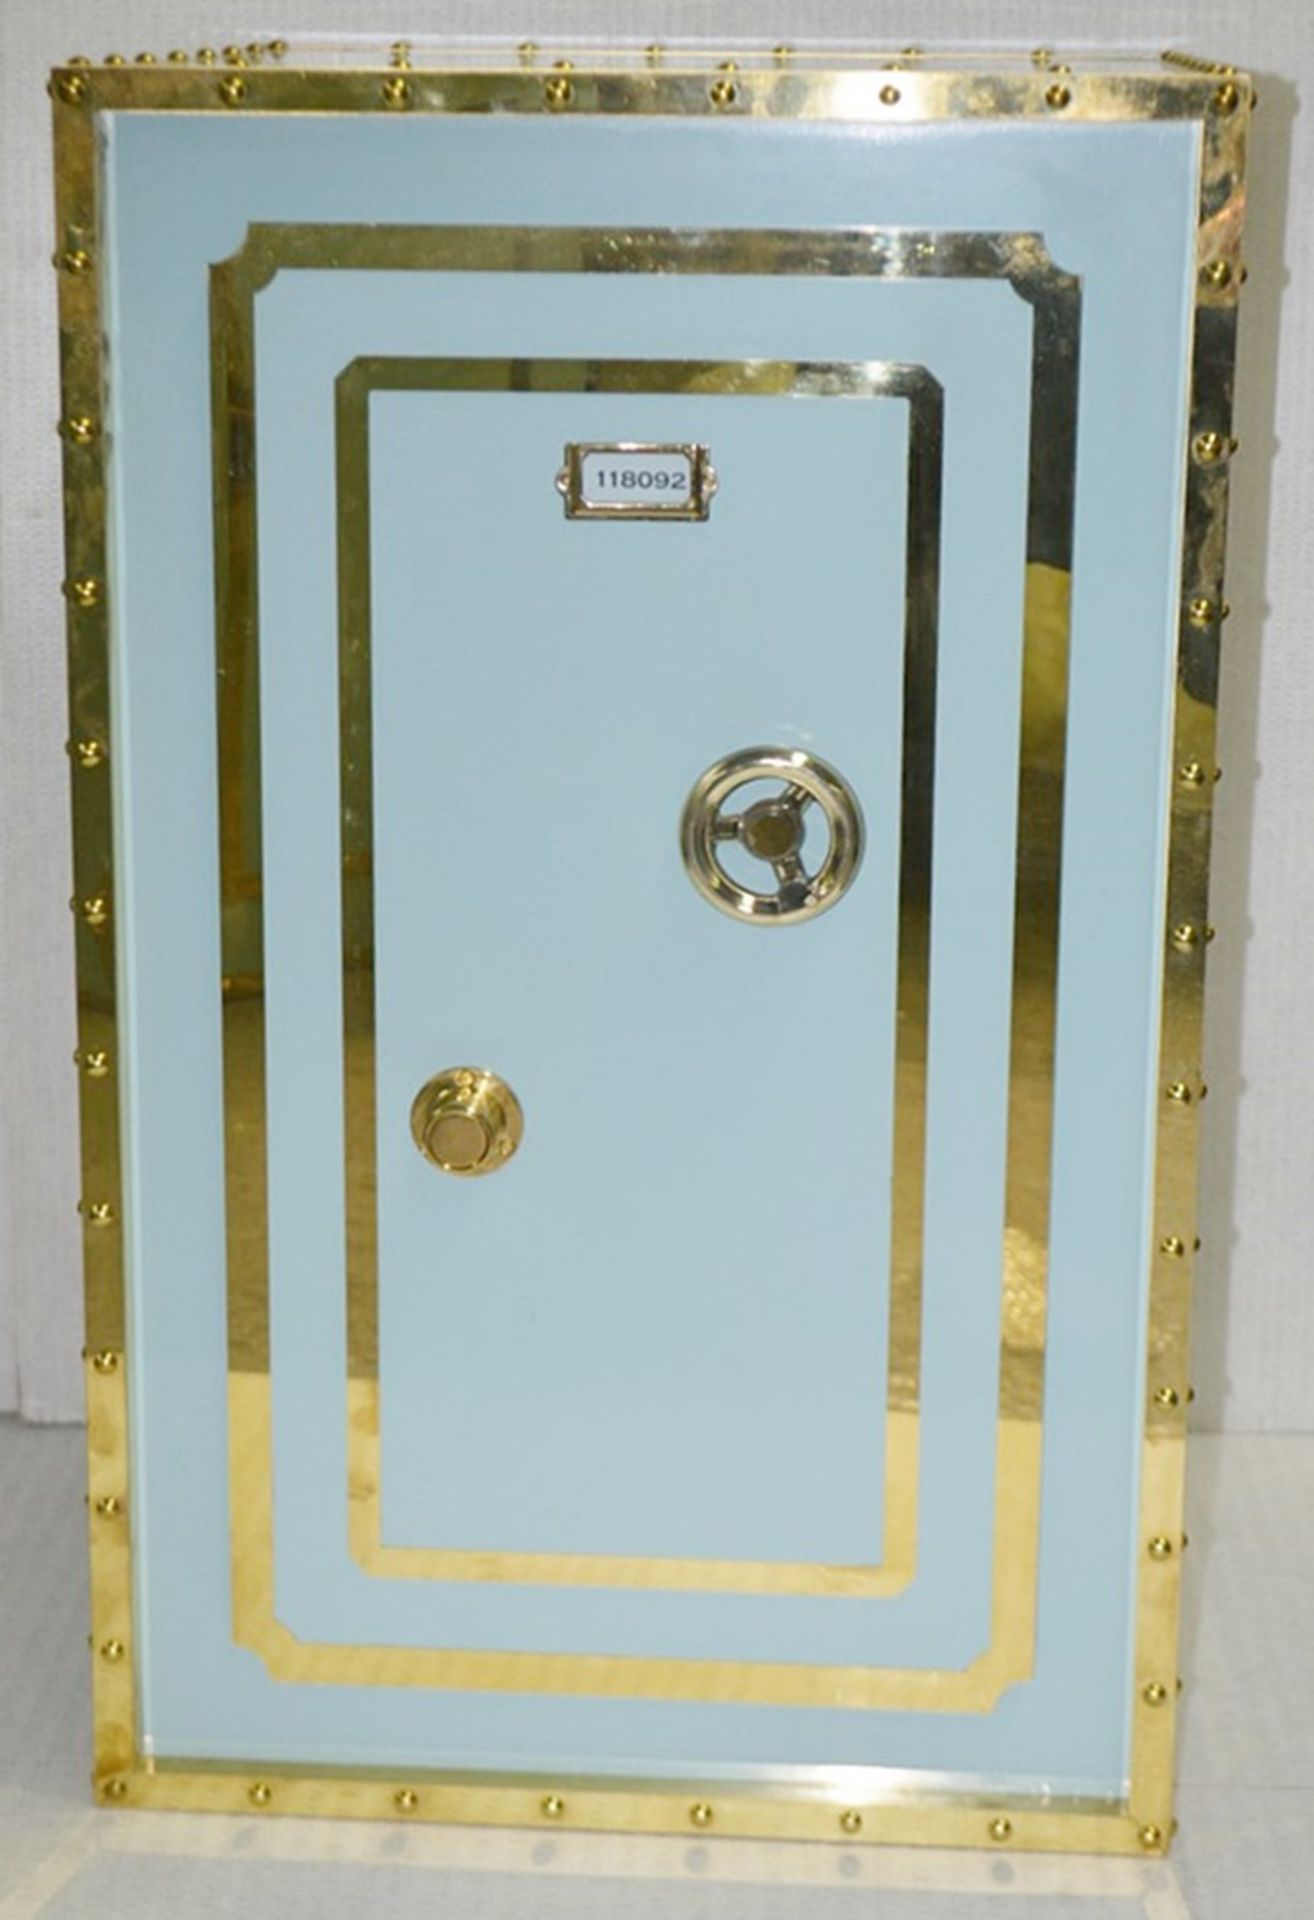 1 x Opulent Bank Vault Safe-style Shop Display Plinth In Tiffany Blue With Gold Trim - Image 3 of 6